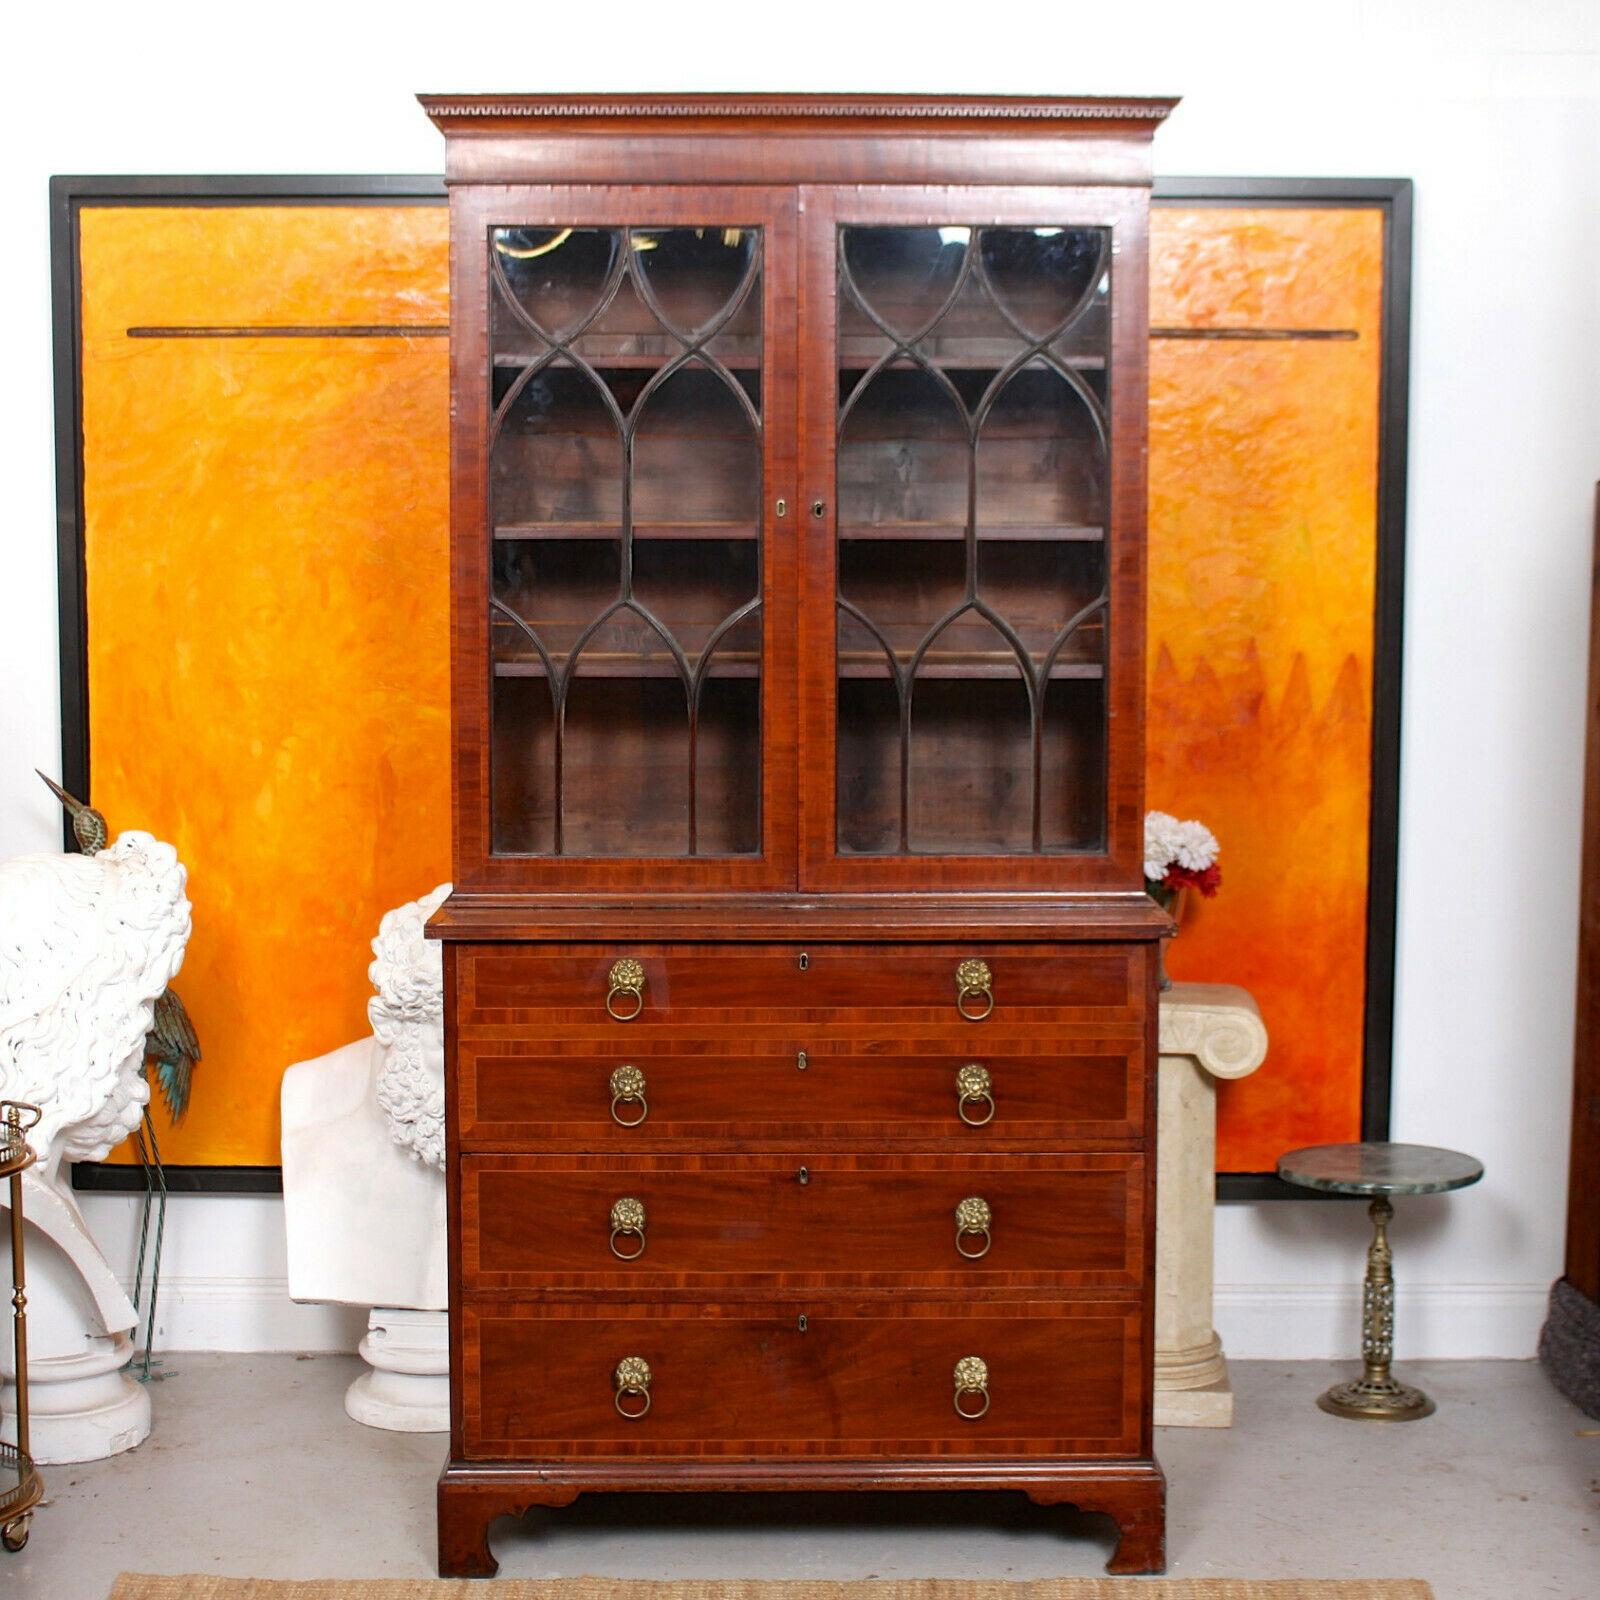 An attractive 19th century inlaid mahogany glazed secretaire.

The mahogany boasting a well figured flamed grain and rich patina.

The upper section with a carved cornice above astragal glazed doors enclosed adjustable shelving. The lower